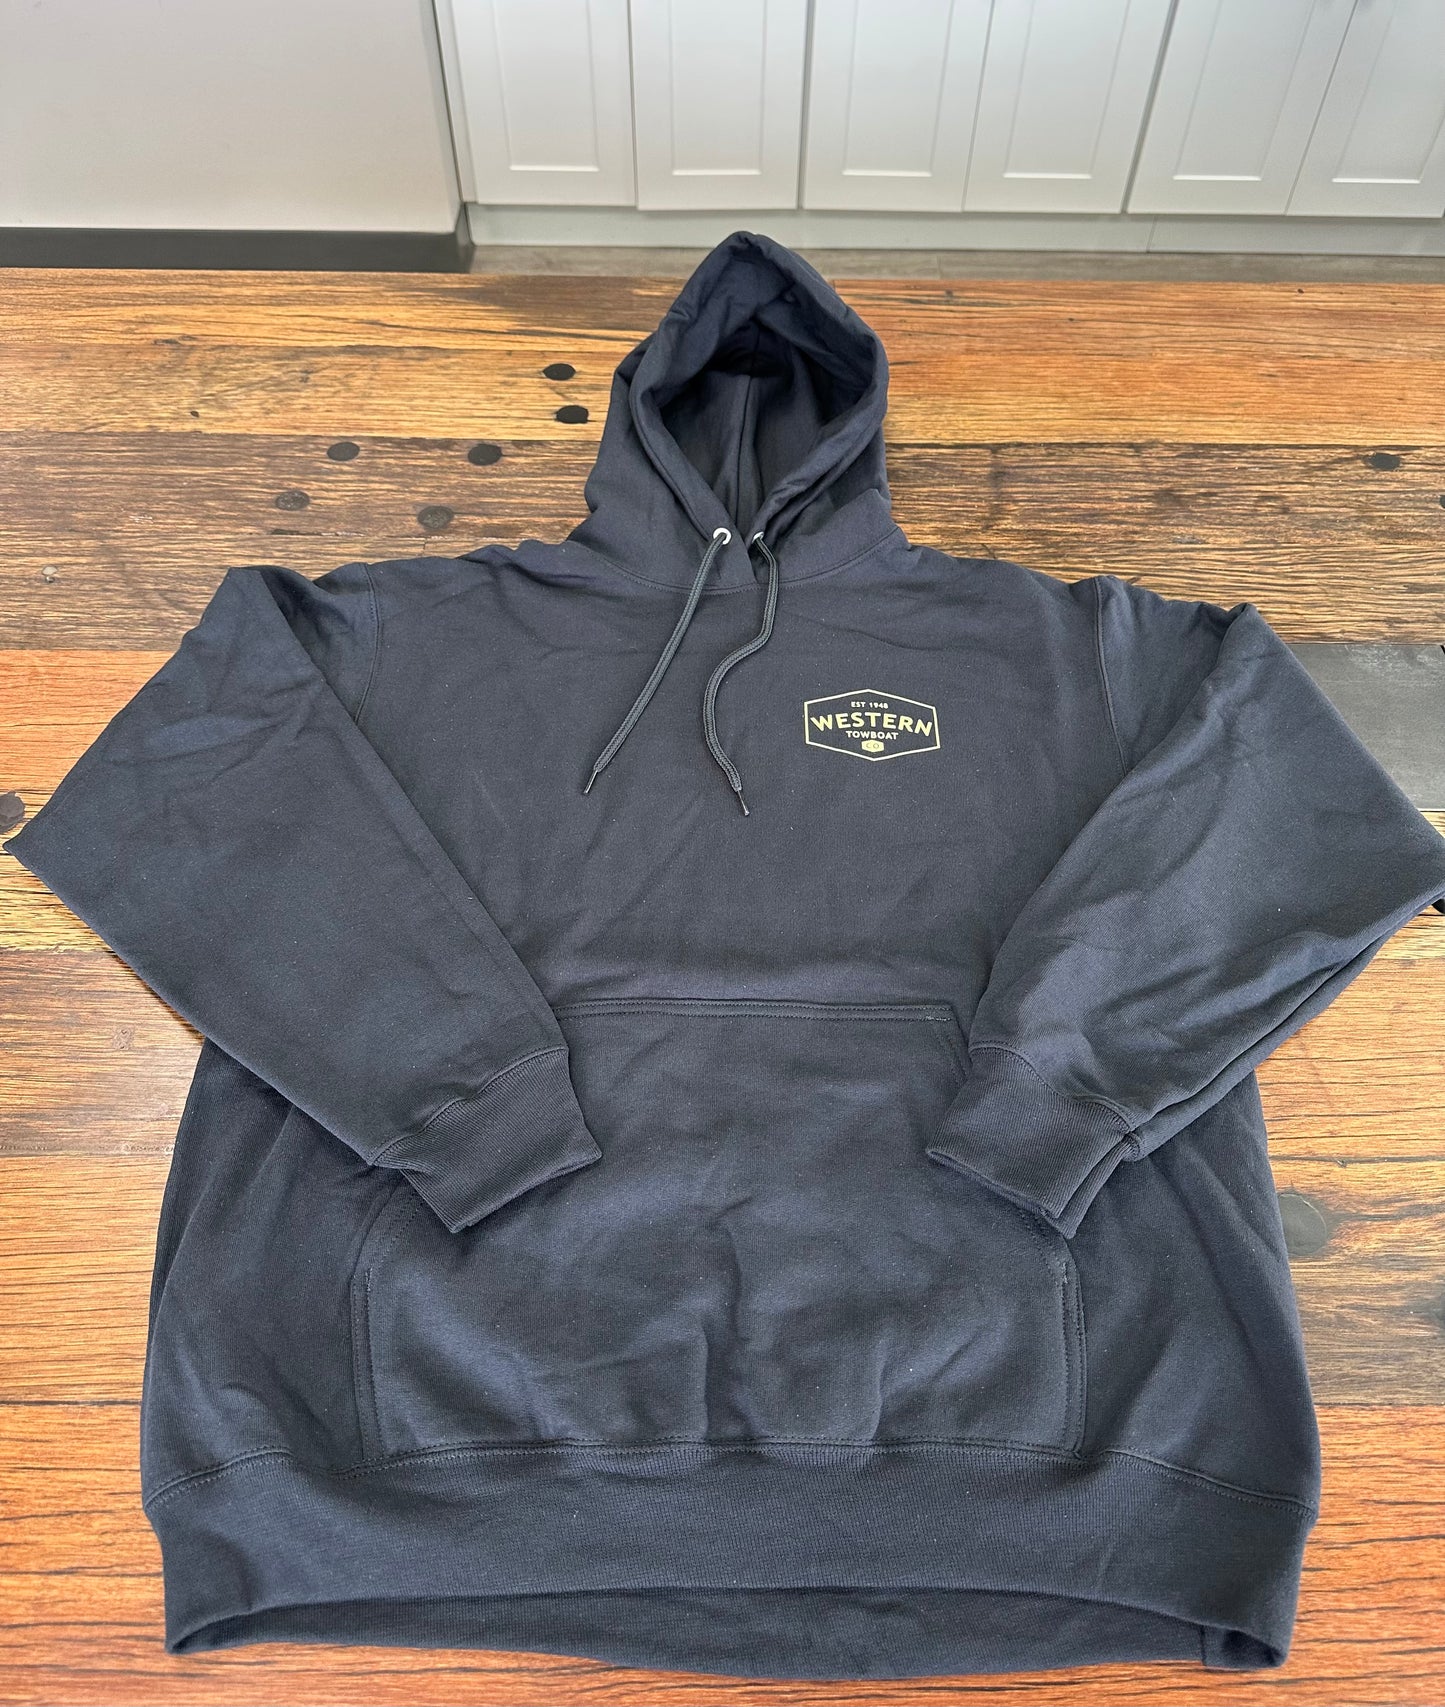 WTB pullover hooded sweatshirt – Western Towboat Company Store